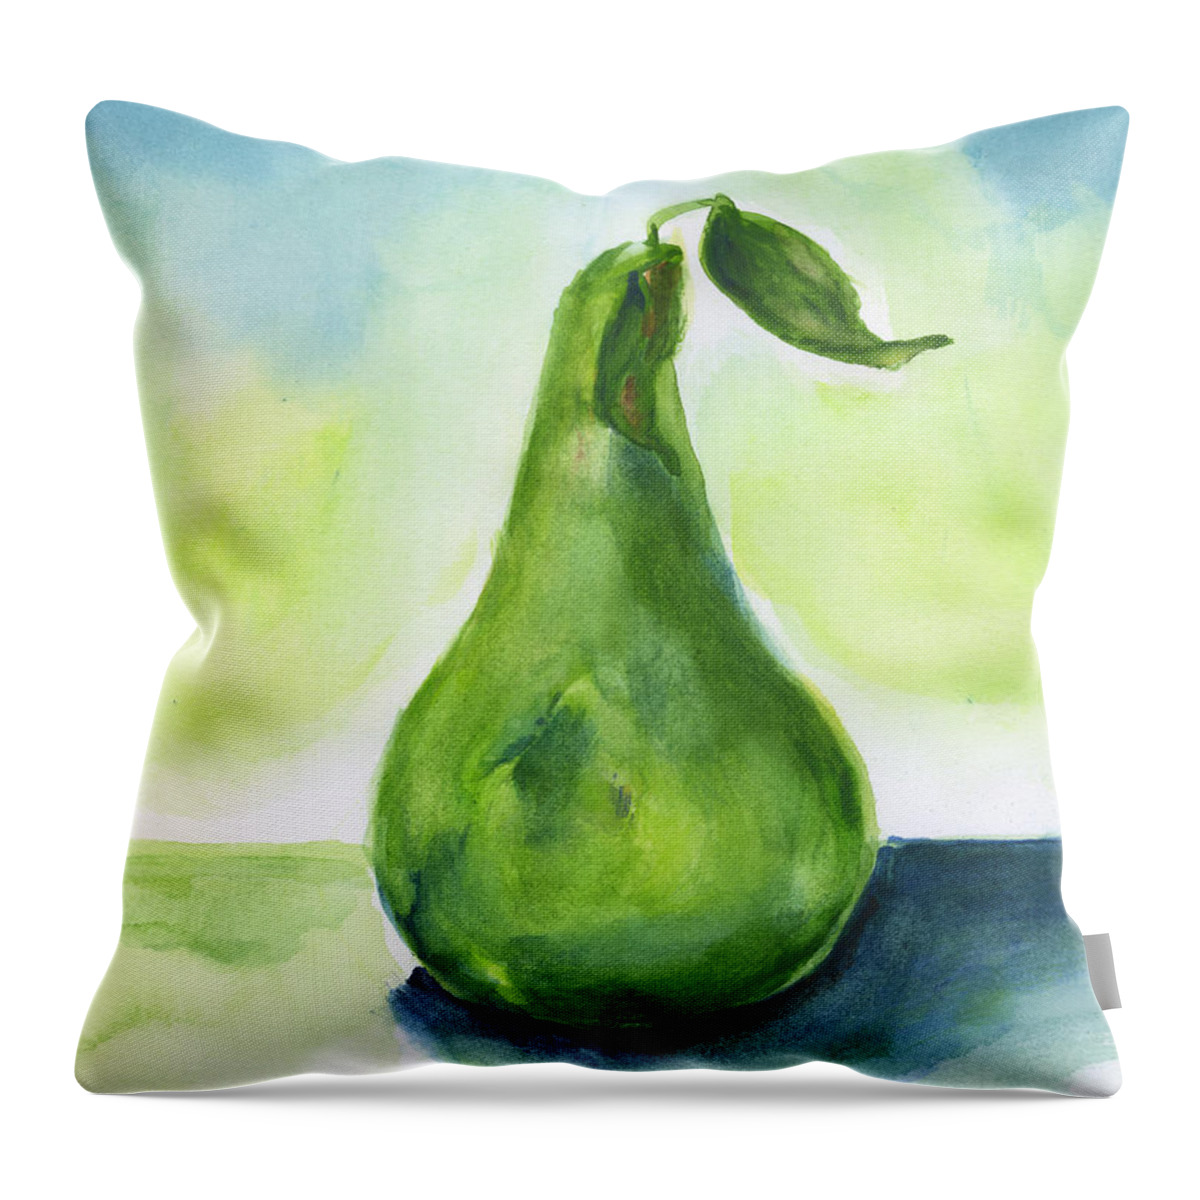 Pear Throw Pillow featuring the painting Pear One by Frank Bright